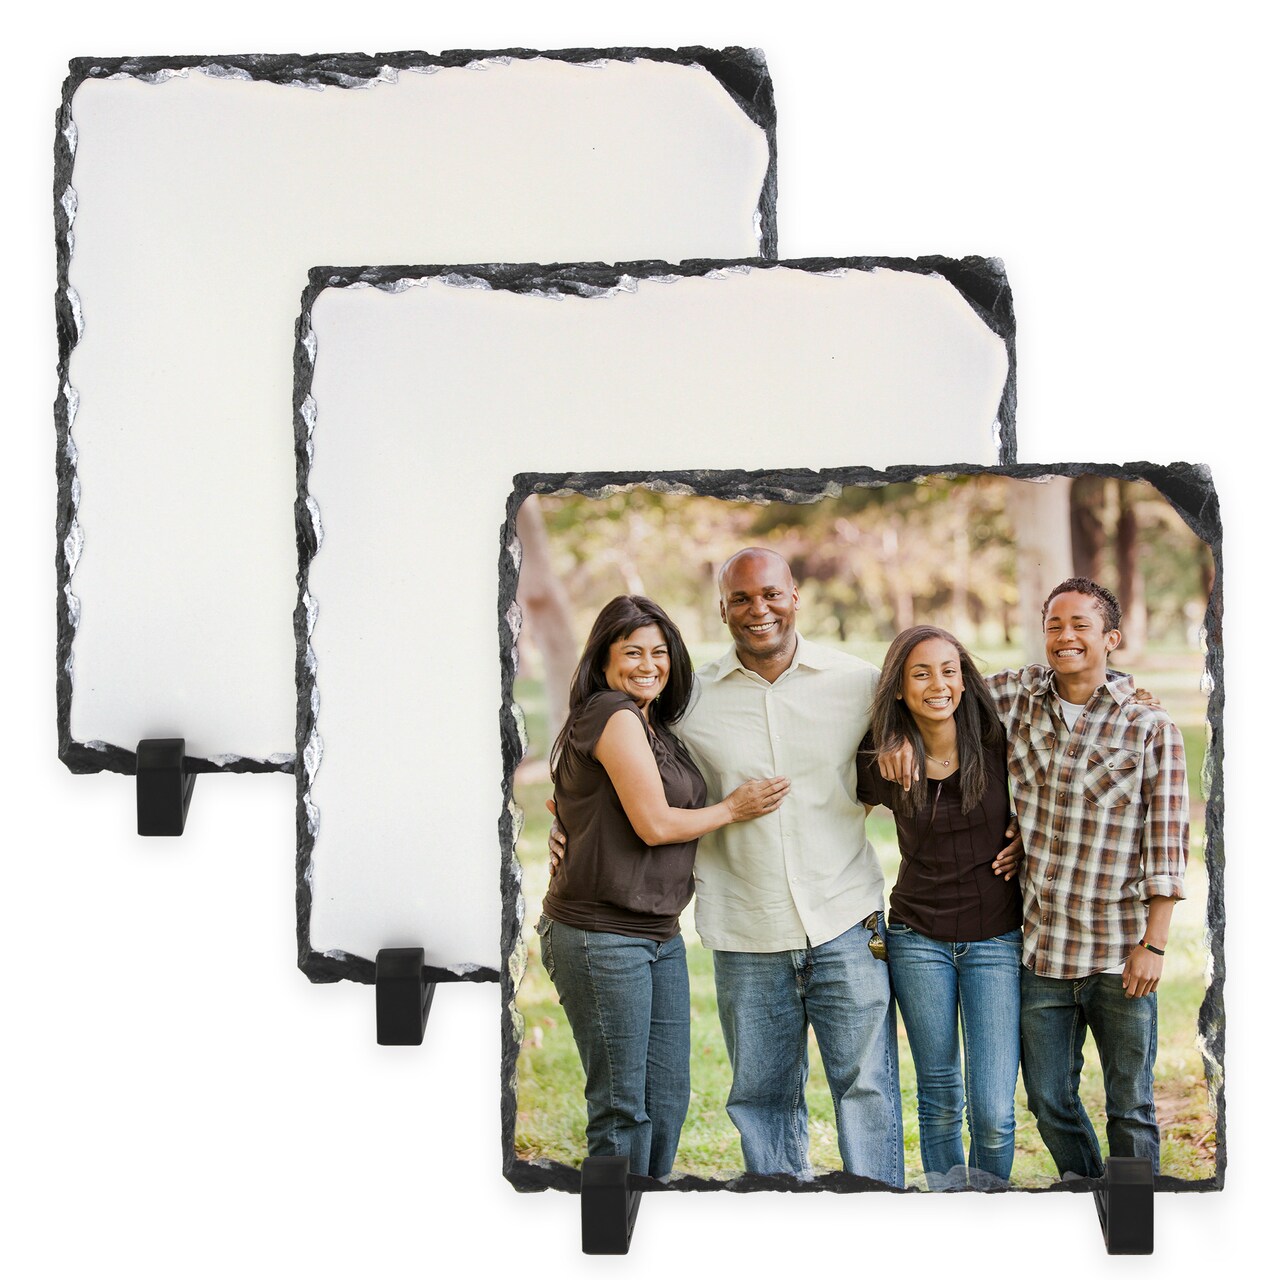 SubliSLATE Sublimation Slate Blank, Square. Includes Black Display